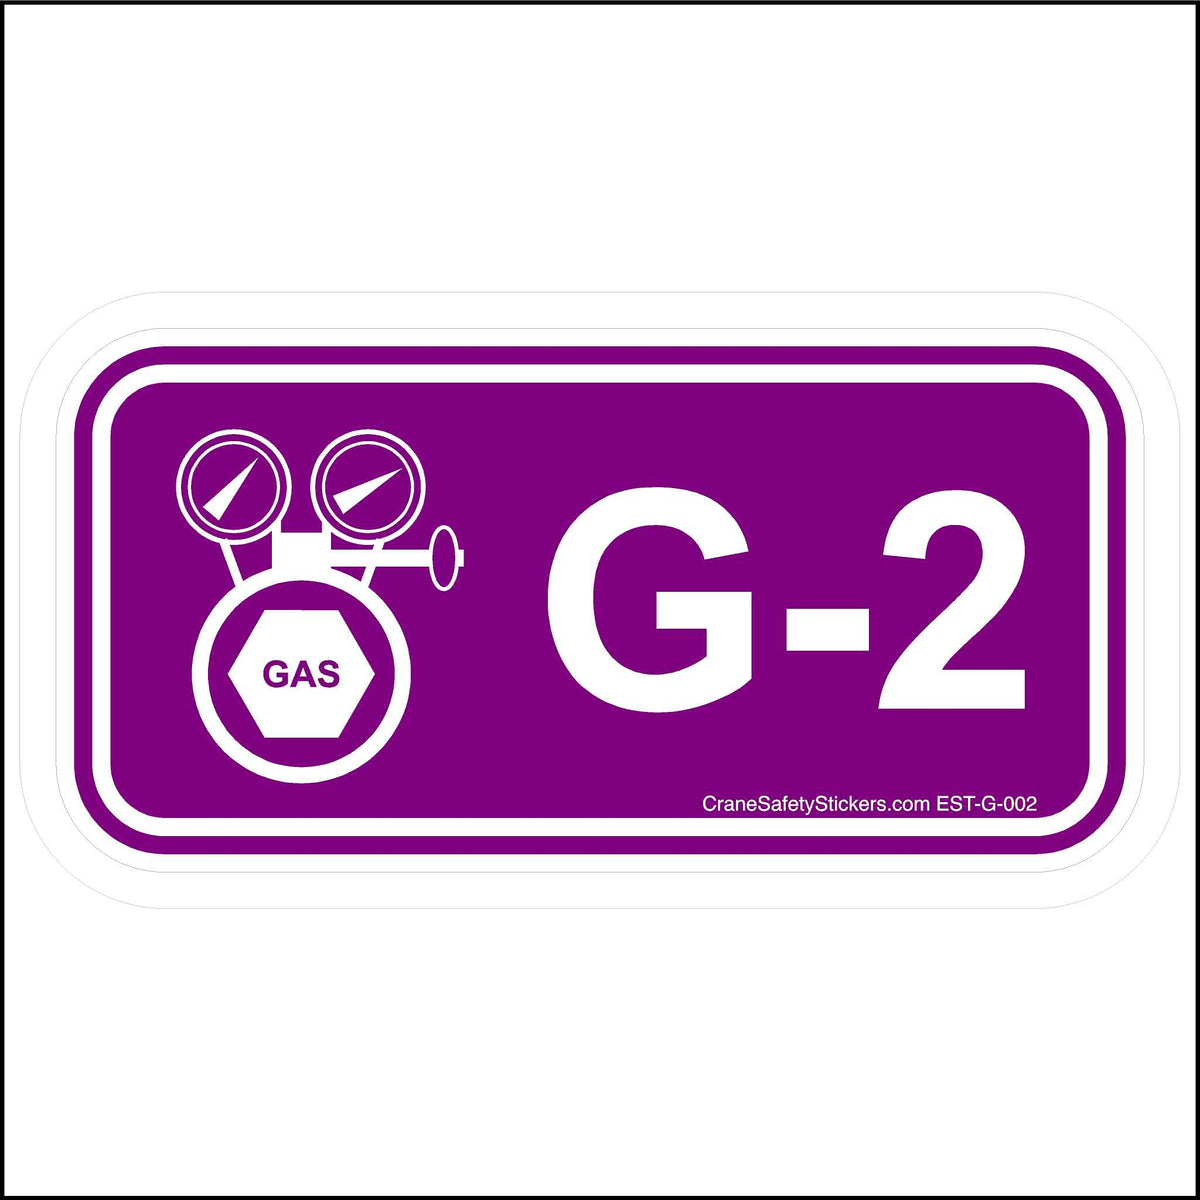 Energy Control Program Gas Disconnect Stickers G-2.